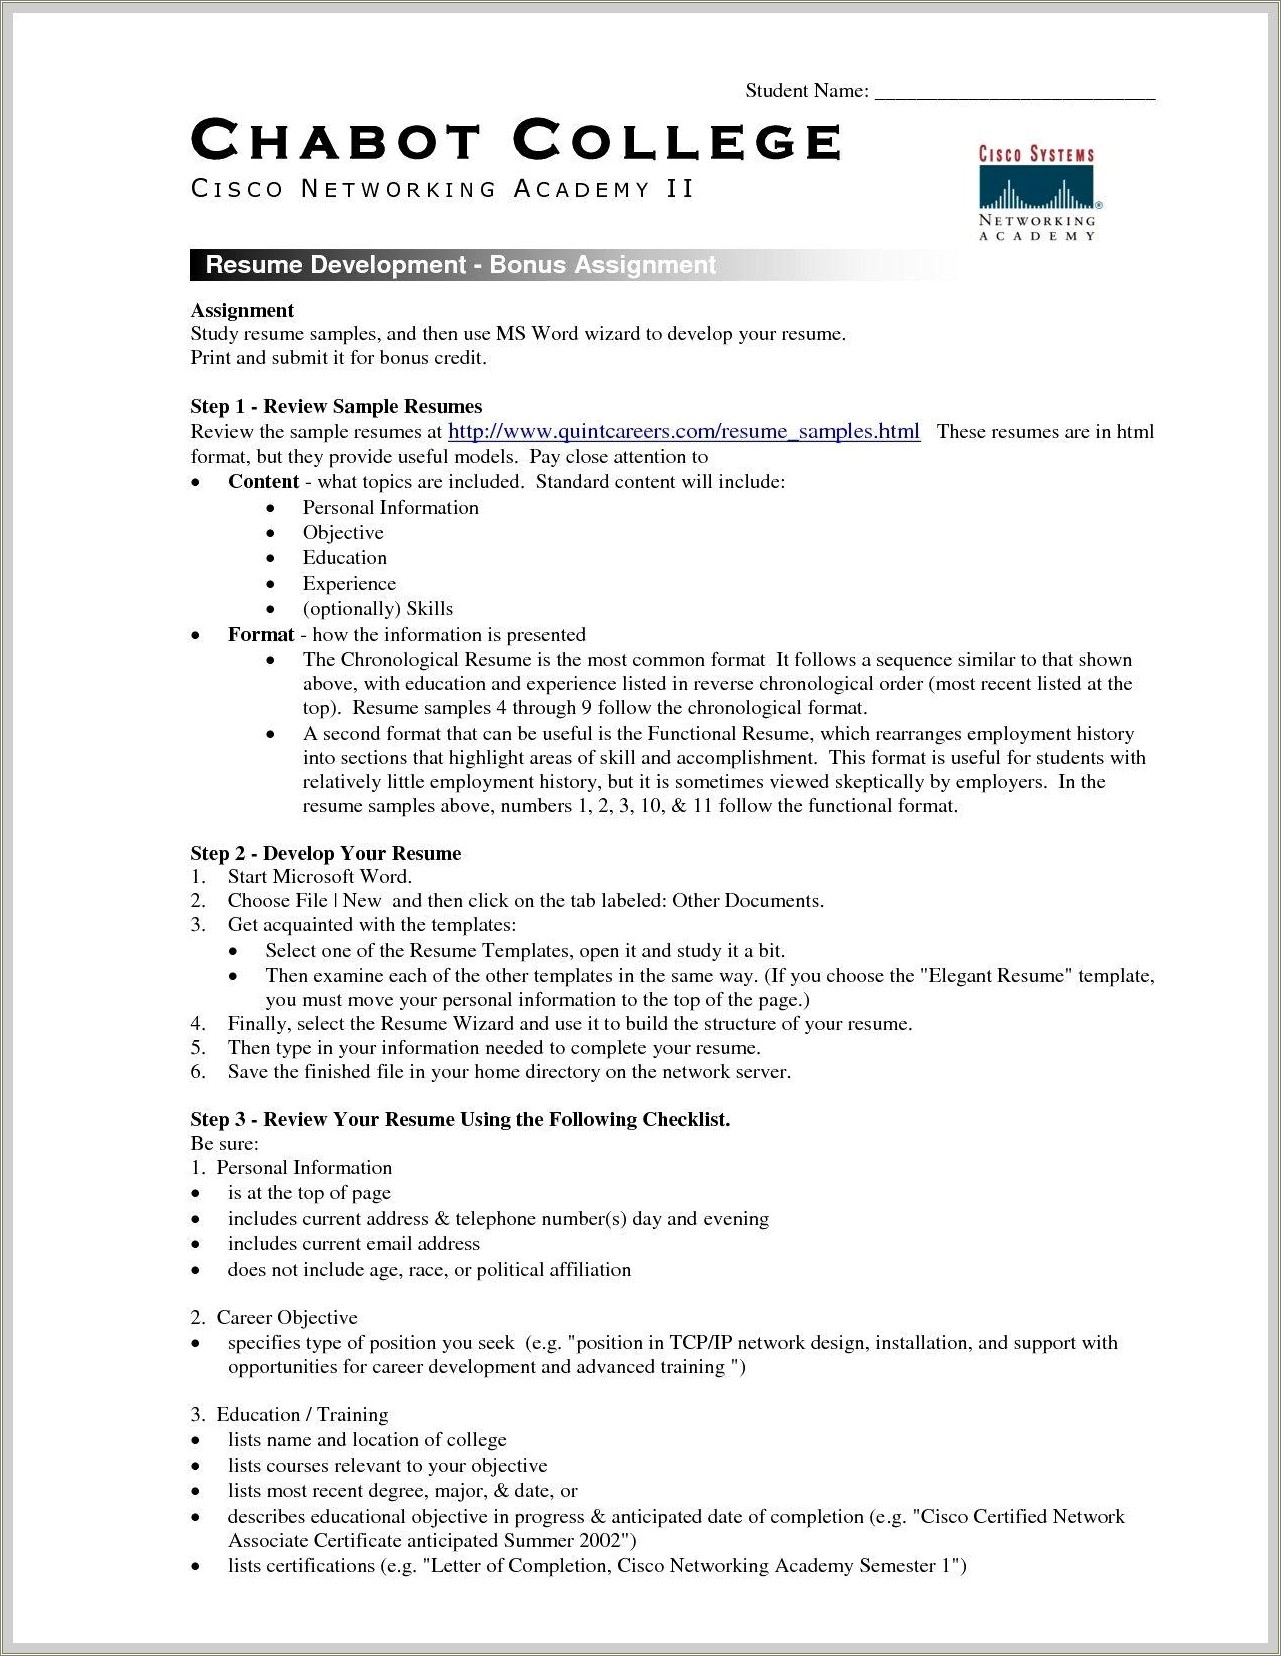 Writing A College Resume On Word Layout